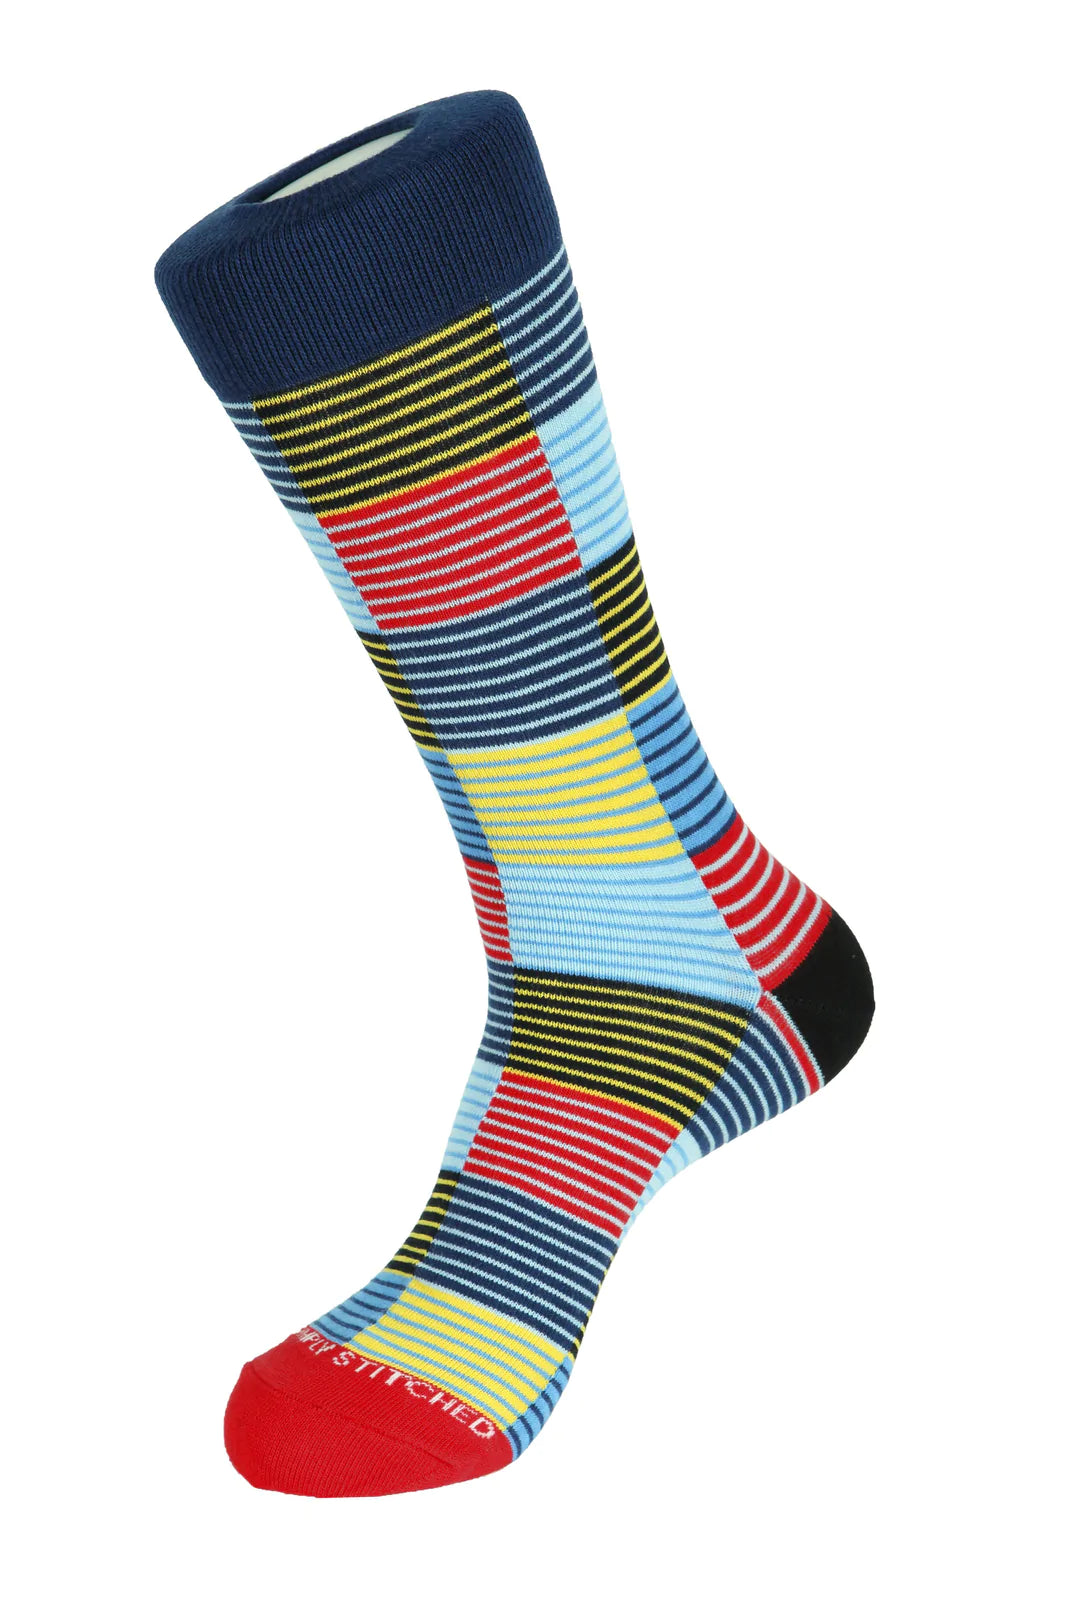 Unsimply Stitched socks with blue, yellow, and red stripes, making it a great pairing with DFR89 blue denim jeans and a fun Sugar sport shirt.